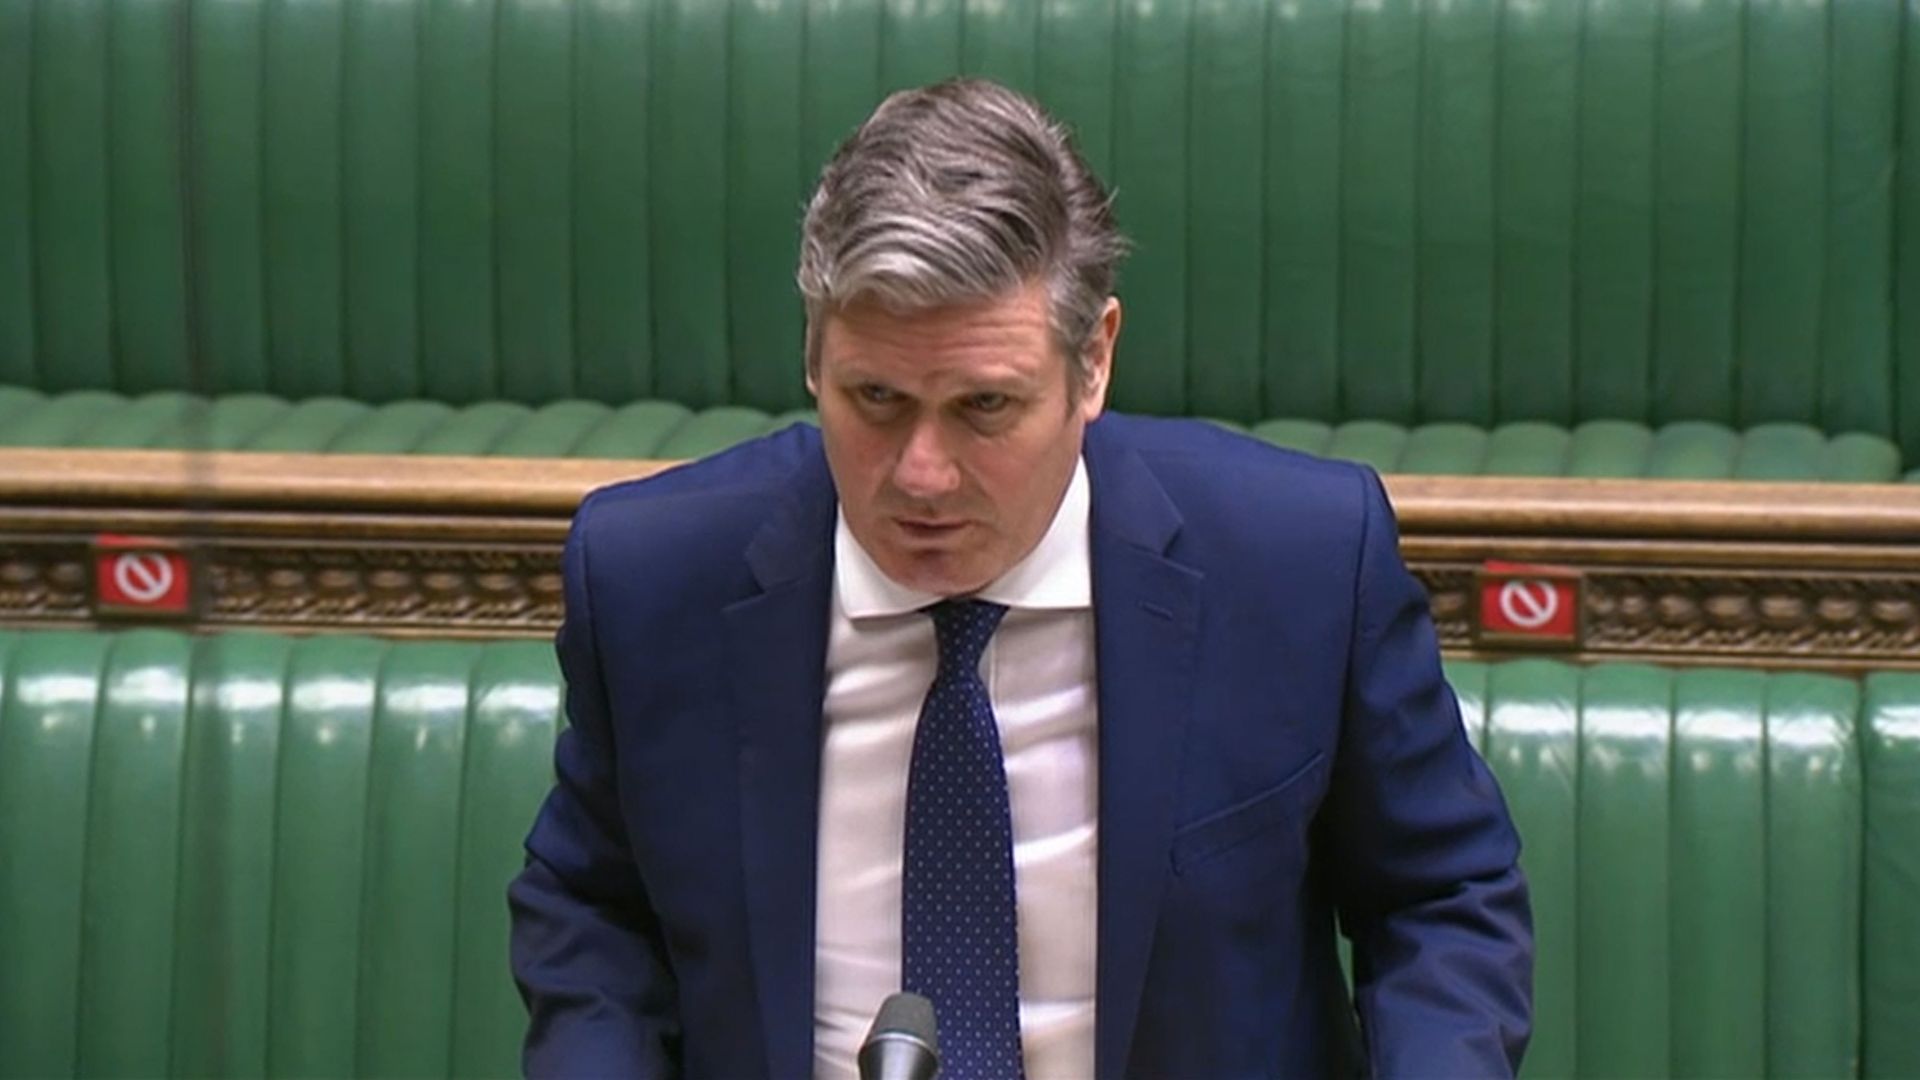 Labour leader Keir Starmer in the House of Commons - Credit: PA